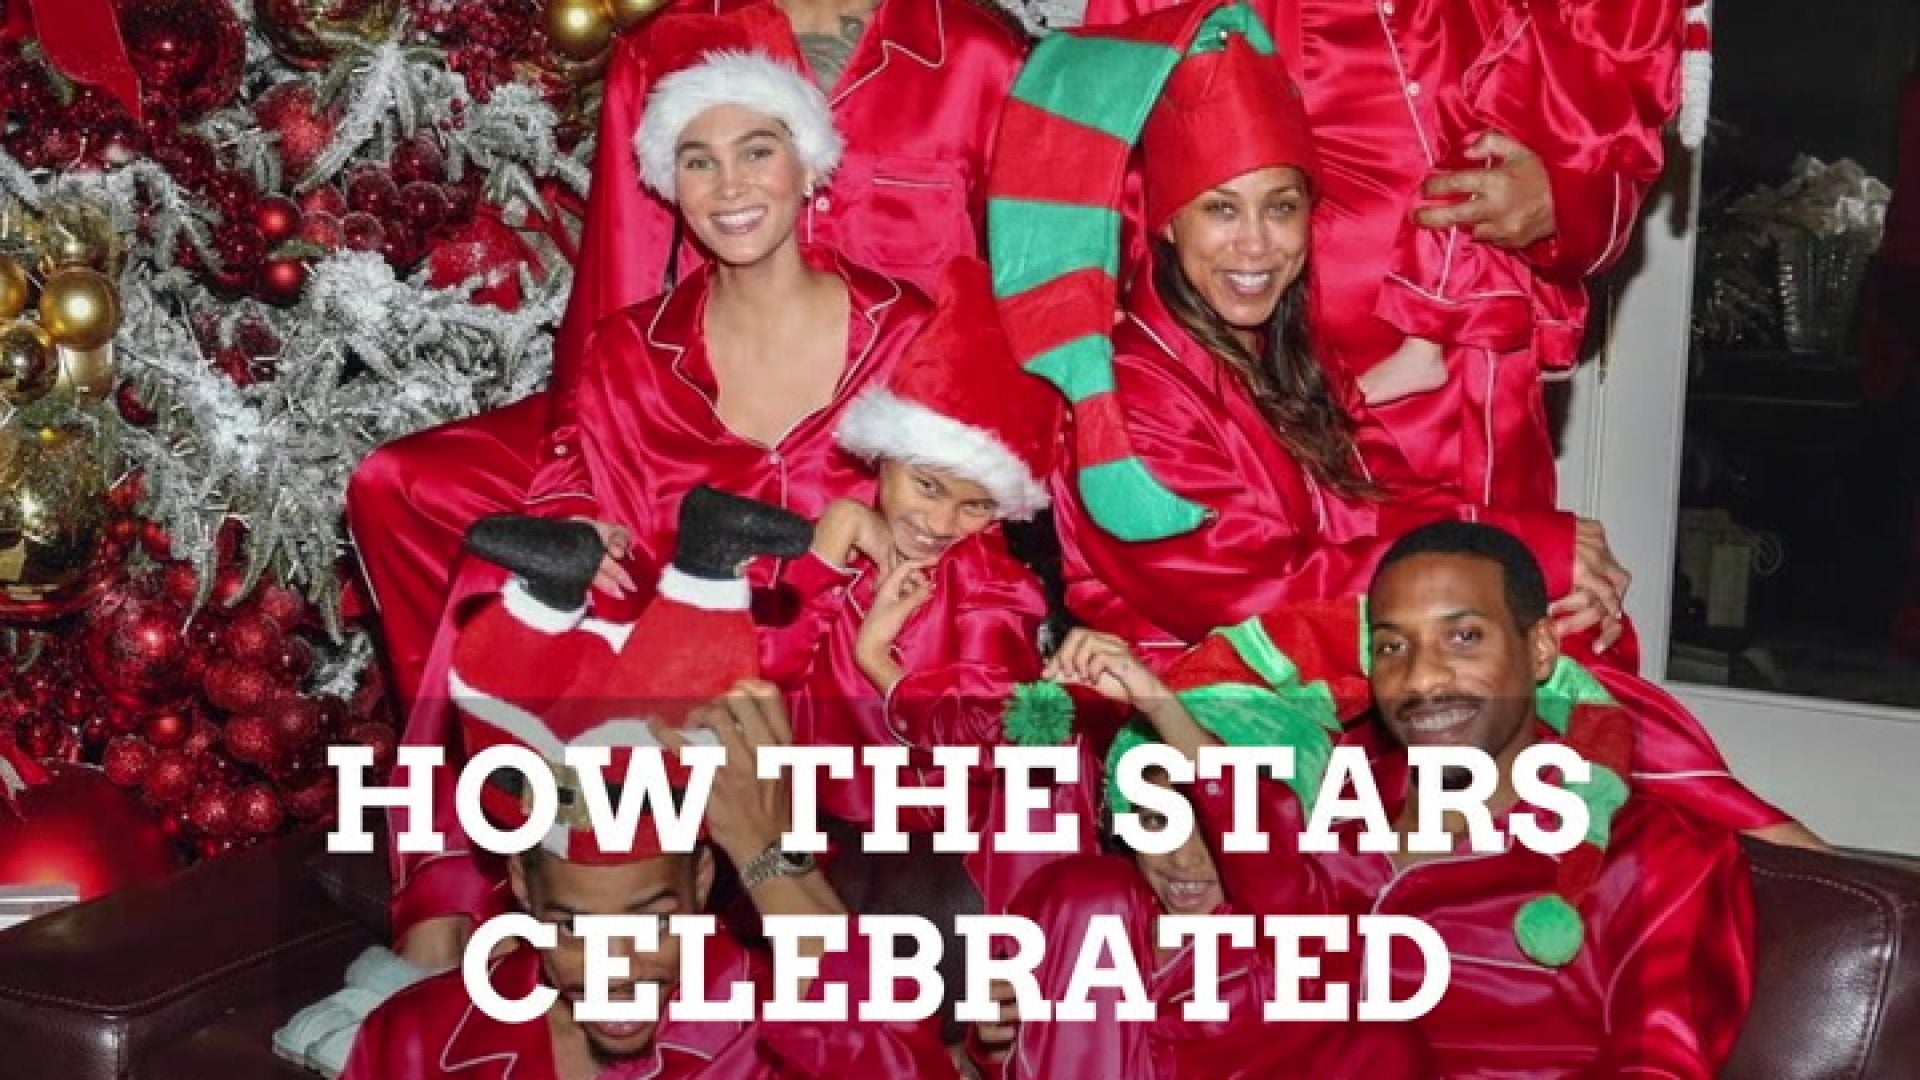 In My Feed | How The Stars Celebrated Christmas 2021